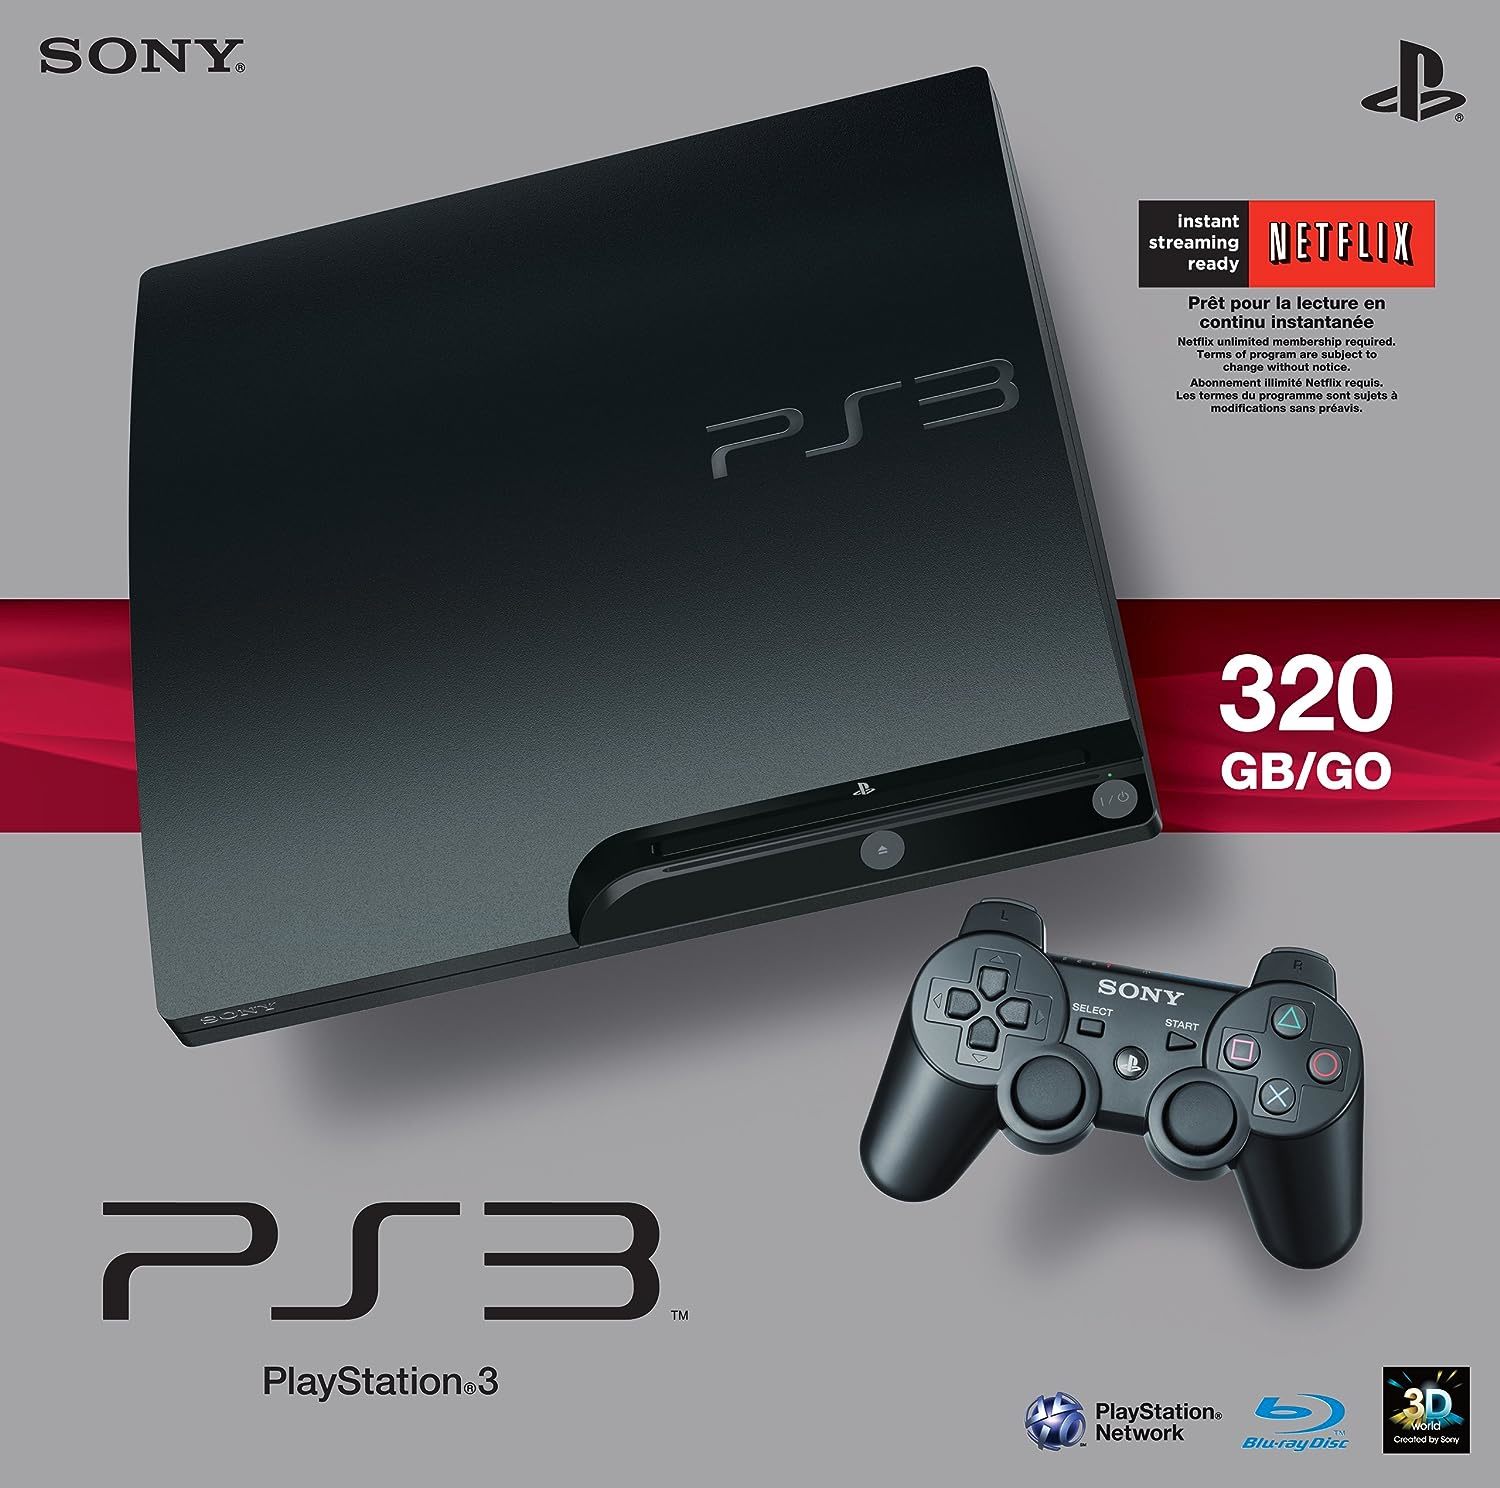 Primary image for Sony Playstation 3 Slim 320 Gb Charcoal Black Console.